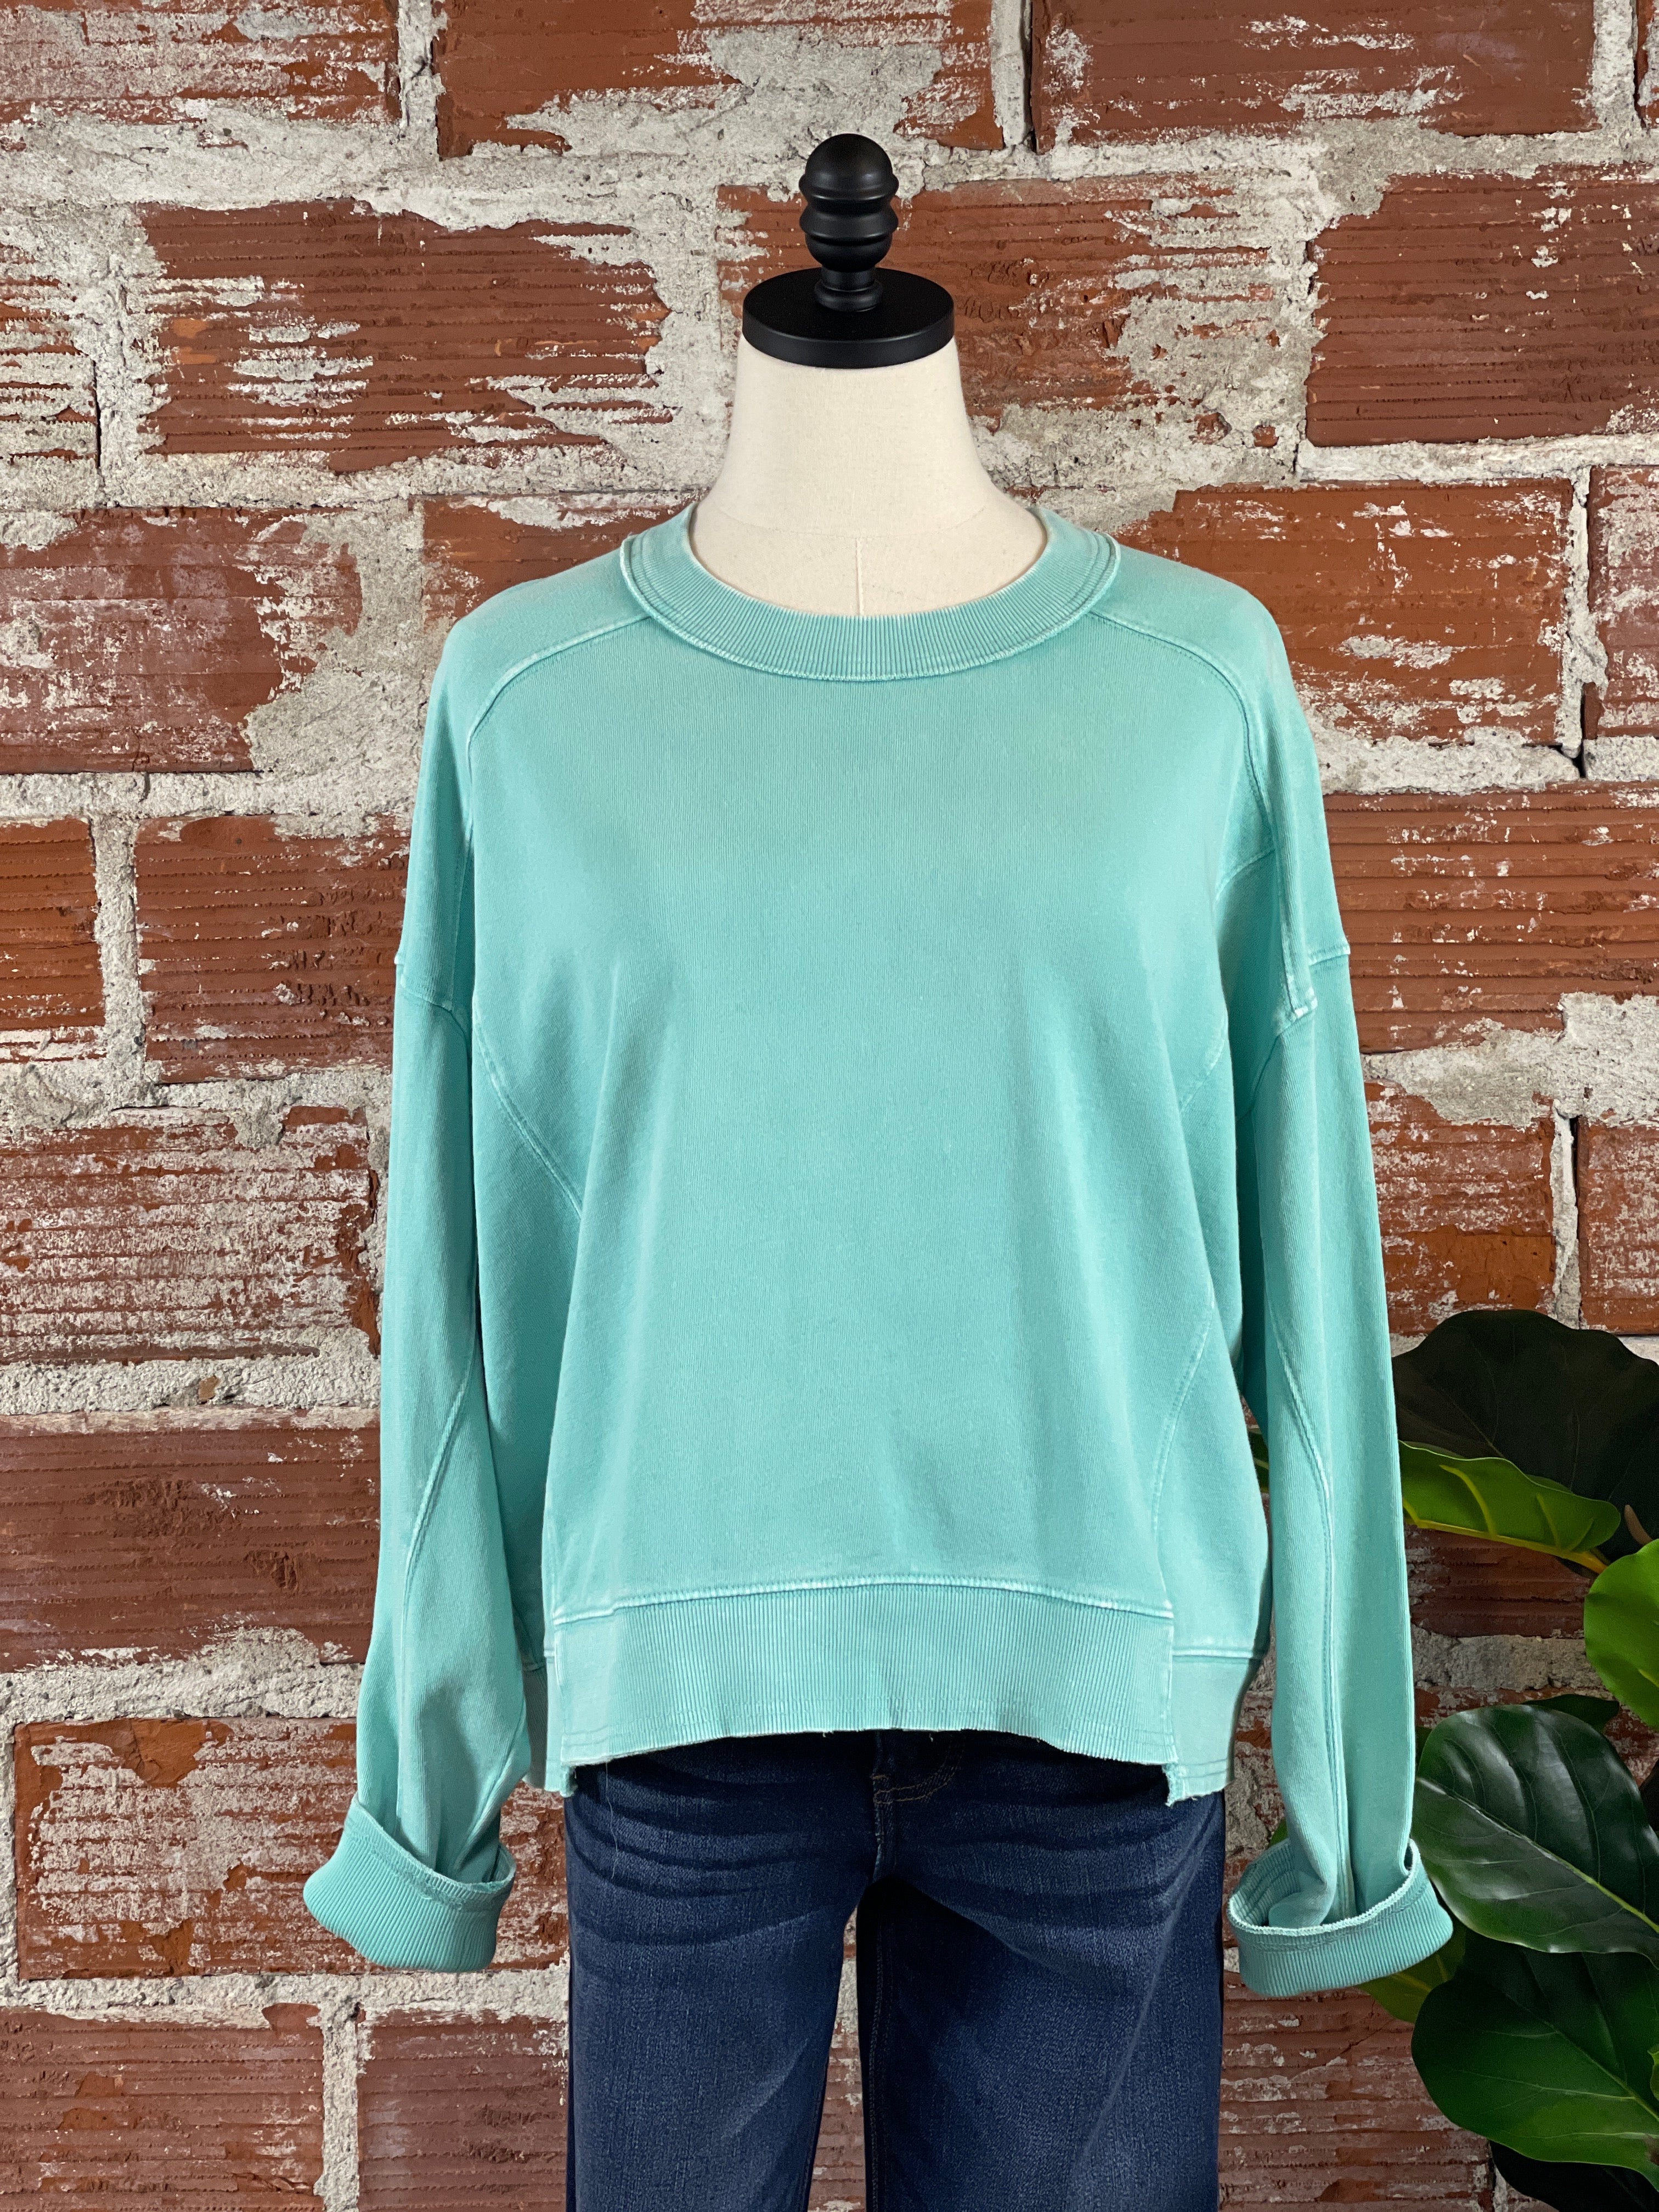 Tracie Mineral Washed Terry Sweatshirt in Aqua-112 Woven Tops - Long Sleeve-Little Bird Boutique